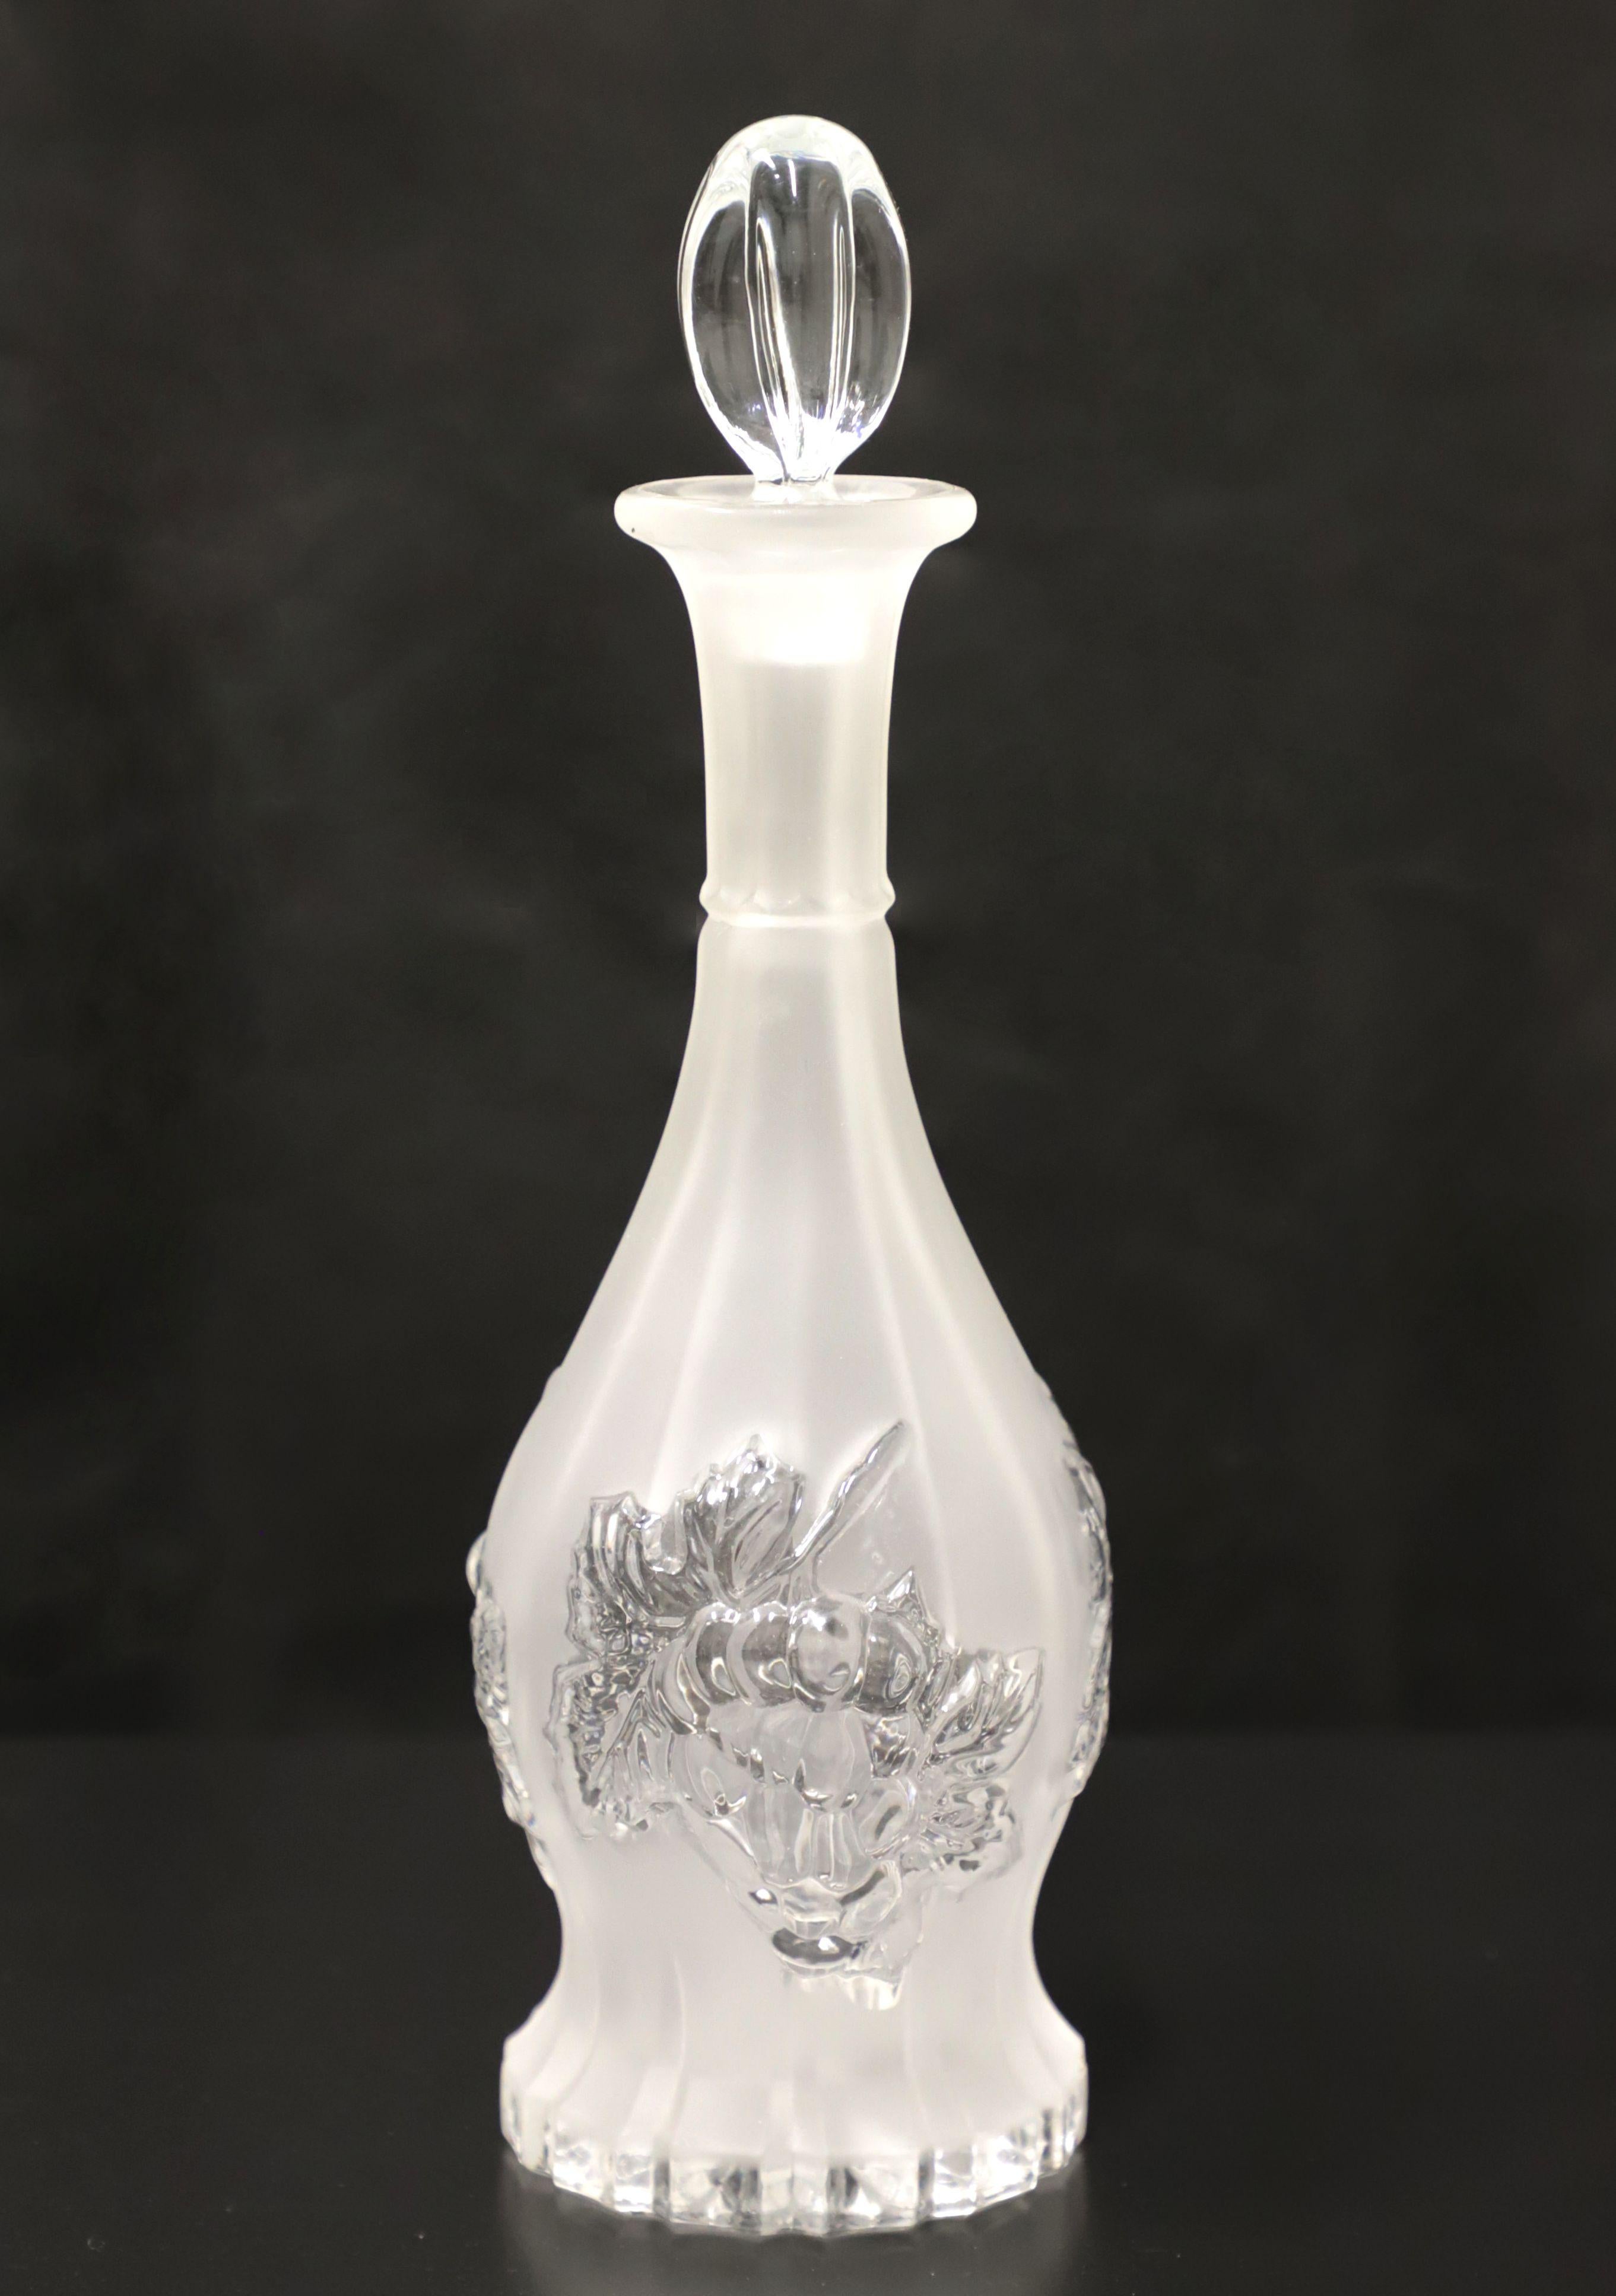 A Mid 20th Century crystal decanter. Frosted crystal decanter with clear grapes & leaves motif and subtle swirl pattern. Clear cylindrical shaped stopper. Origin unknown, most likely the USA.

Measures: 4W 4D 13H, weighs approximately: 3 lbs

Very